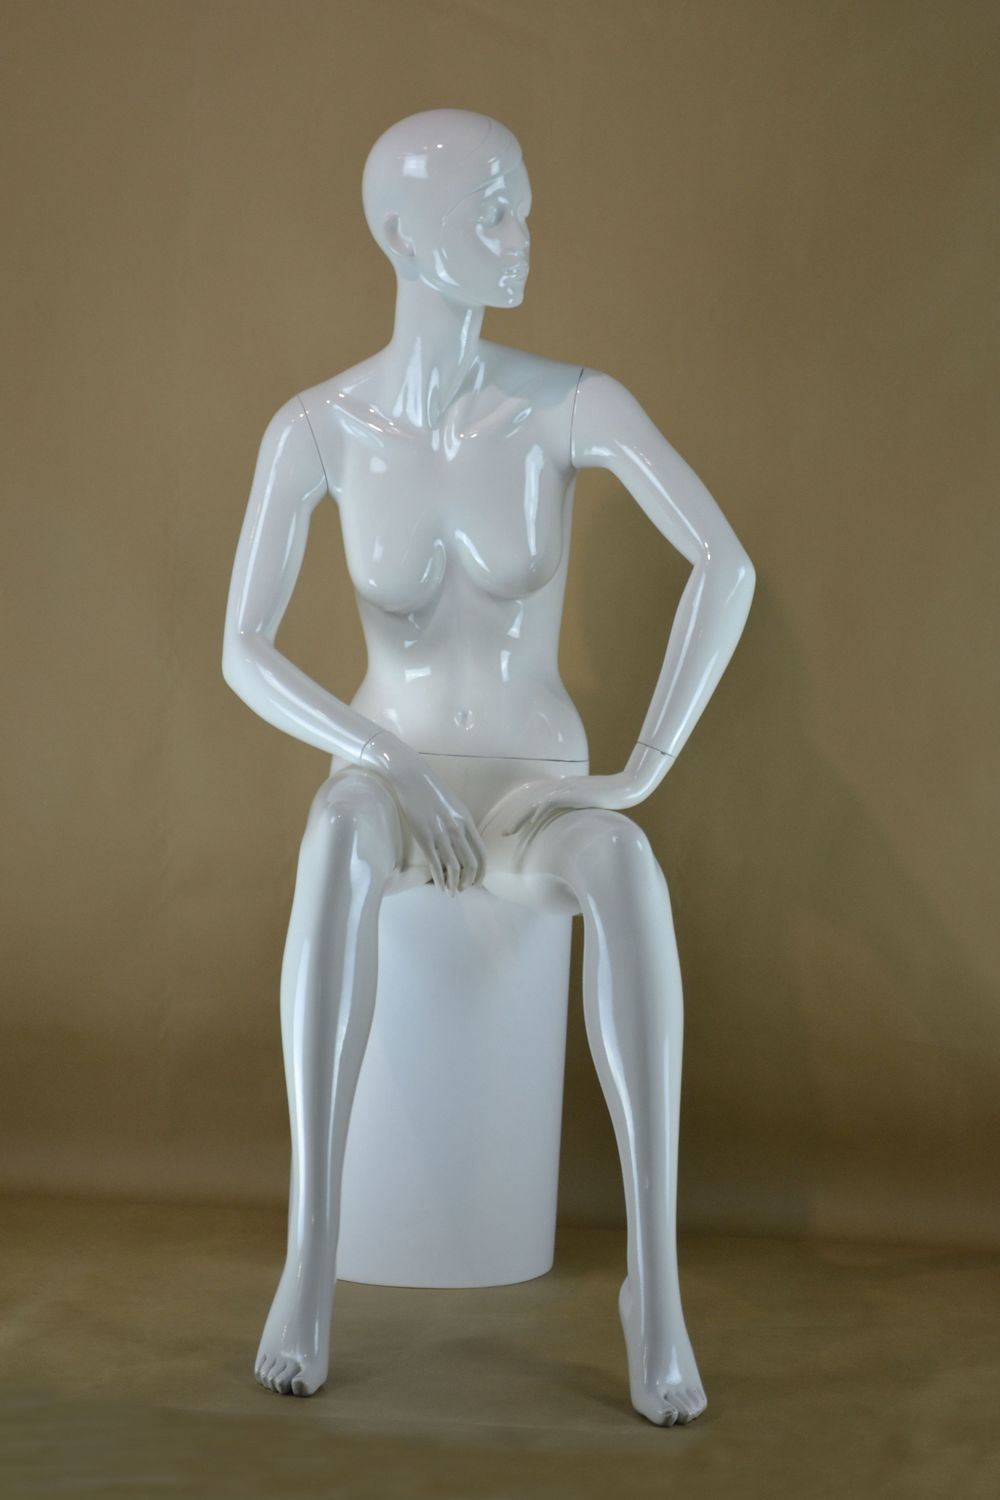 High-Quality Sitting Female Mannequin Models